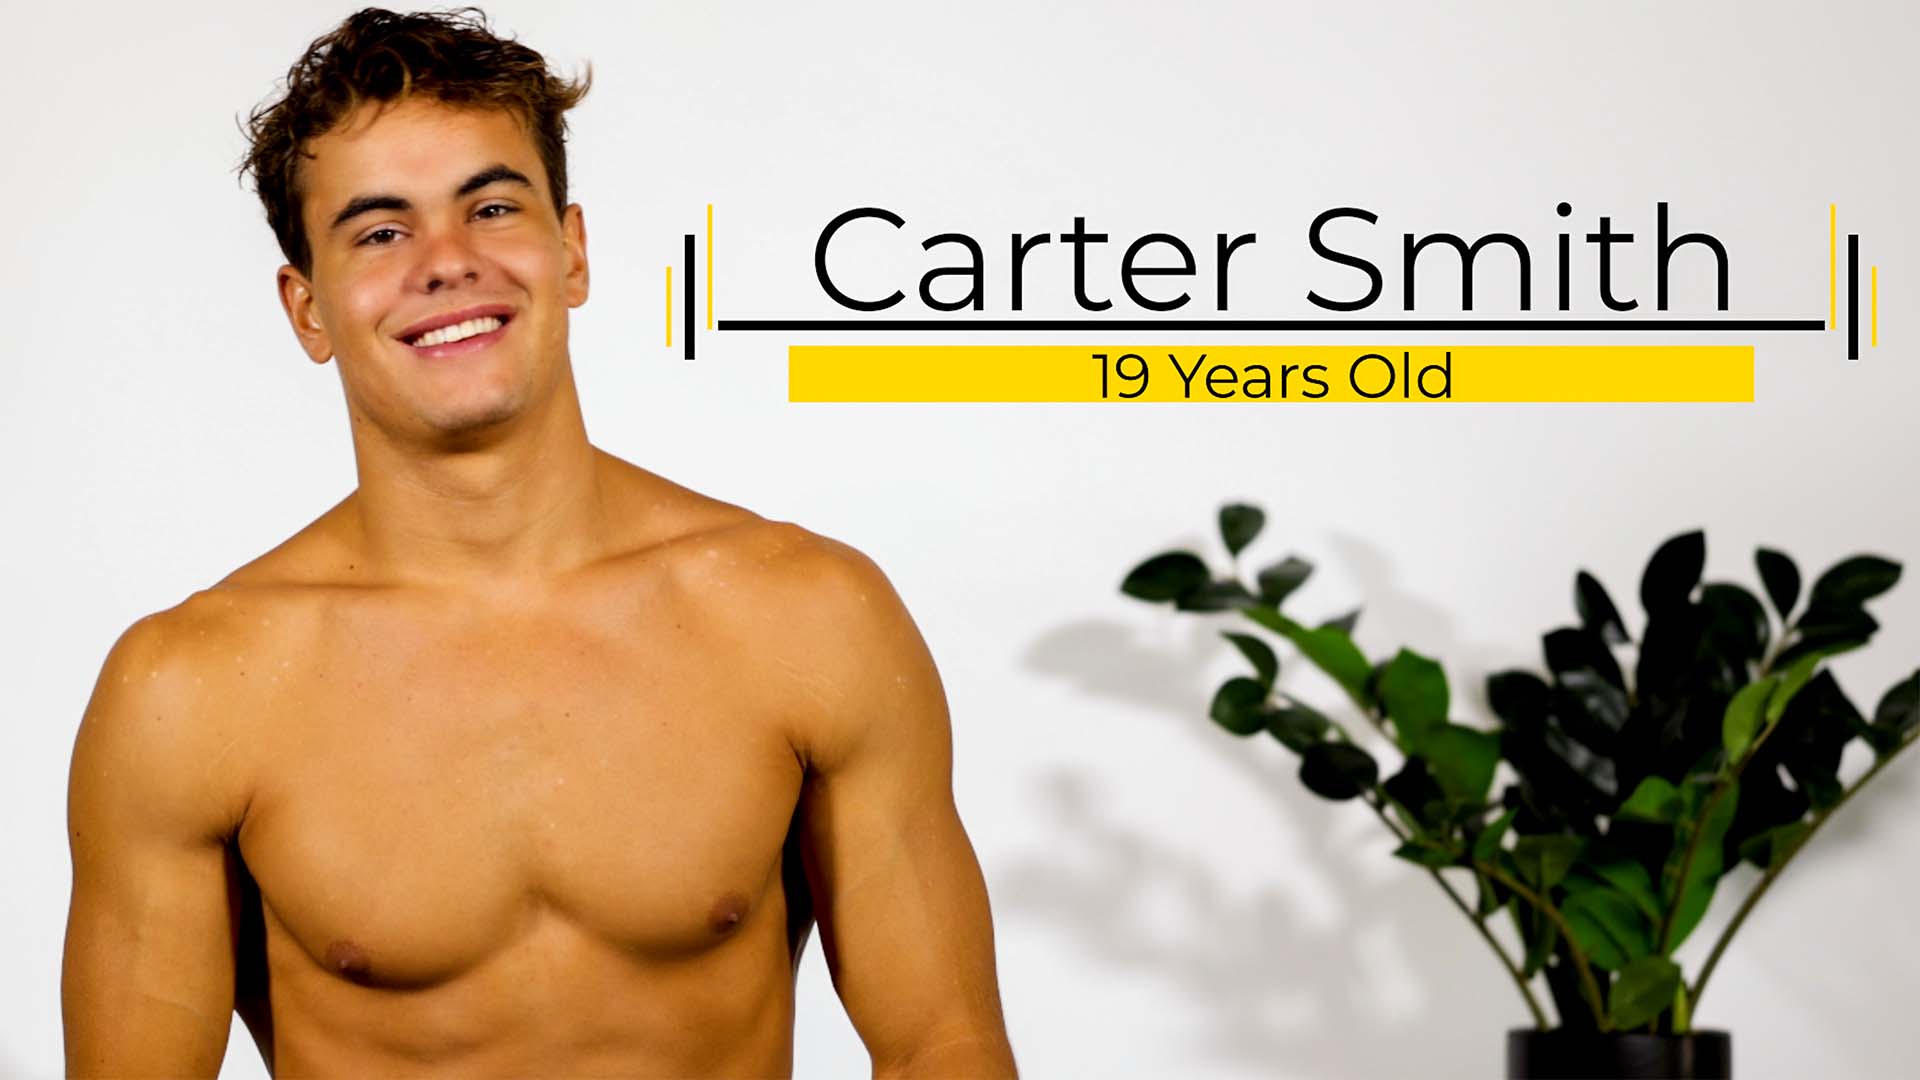 Humble Hottie Carter Smith Wanted A New Experience After A Big Break Up!